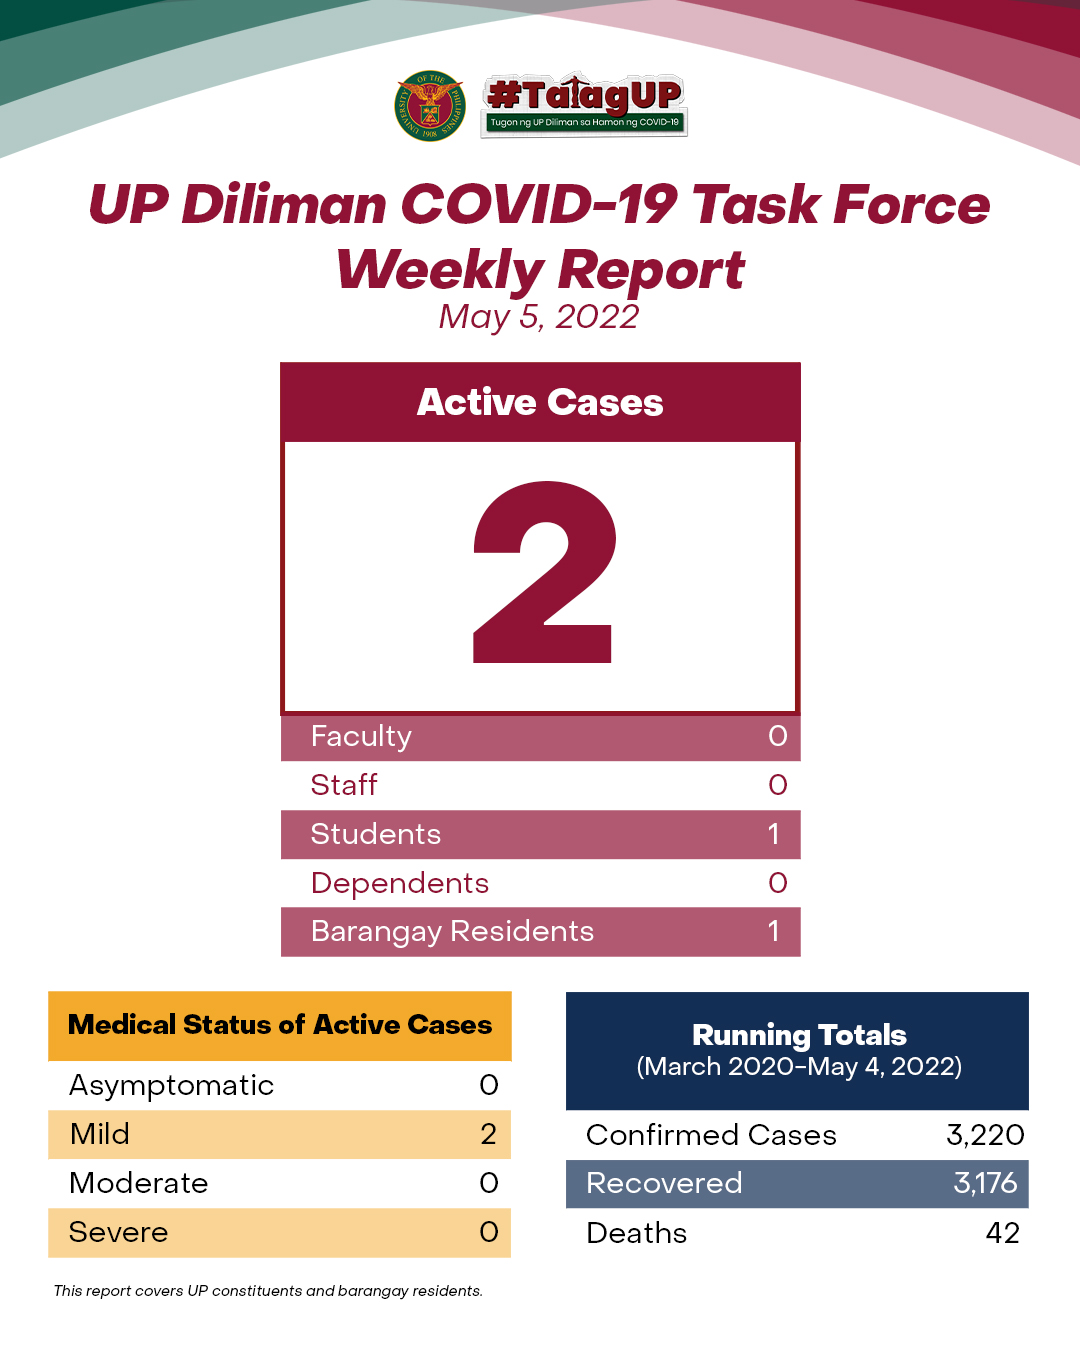 UP Diliman COVID-19 Task Force Weekly Report (May 5, 2022)